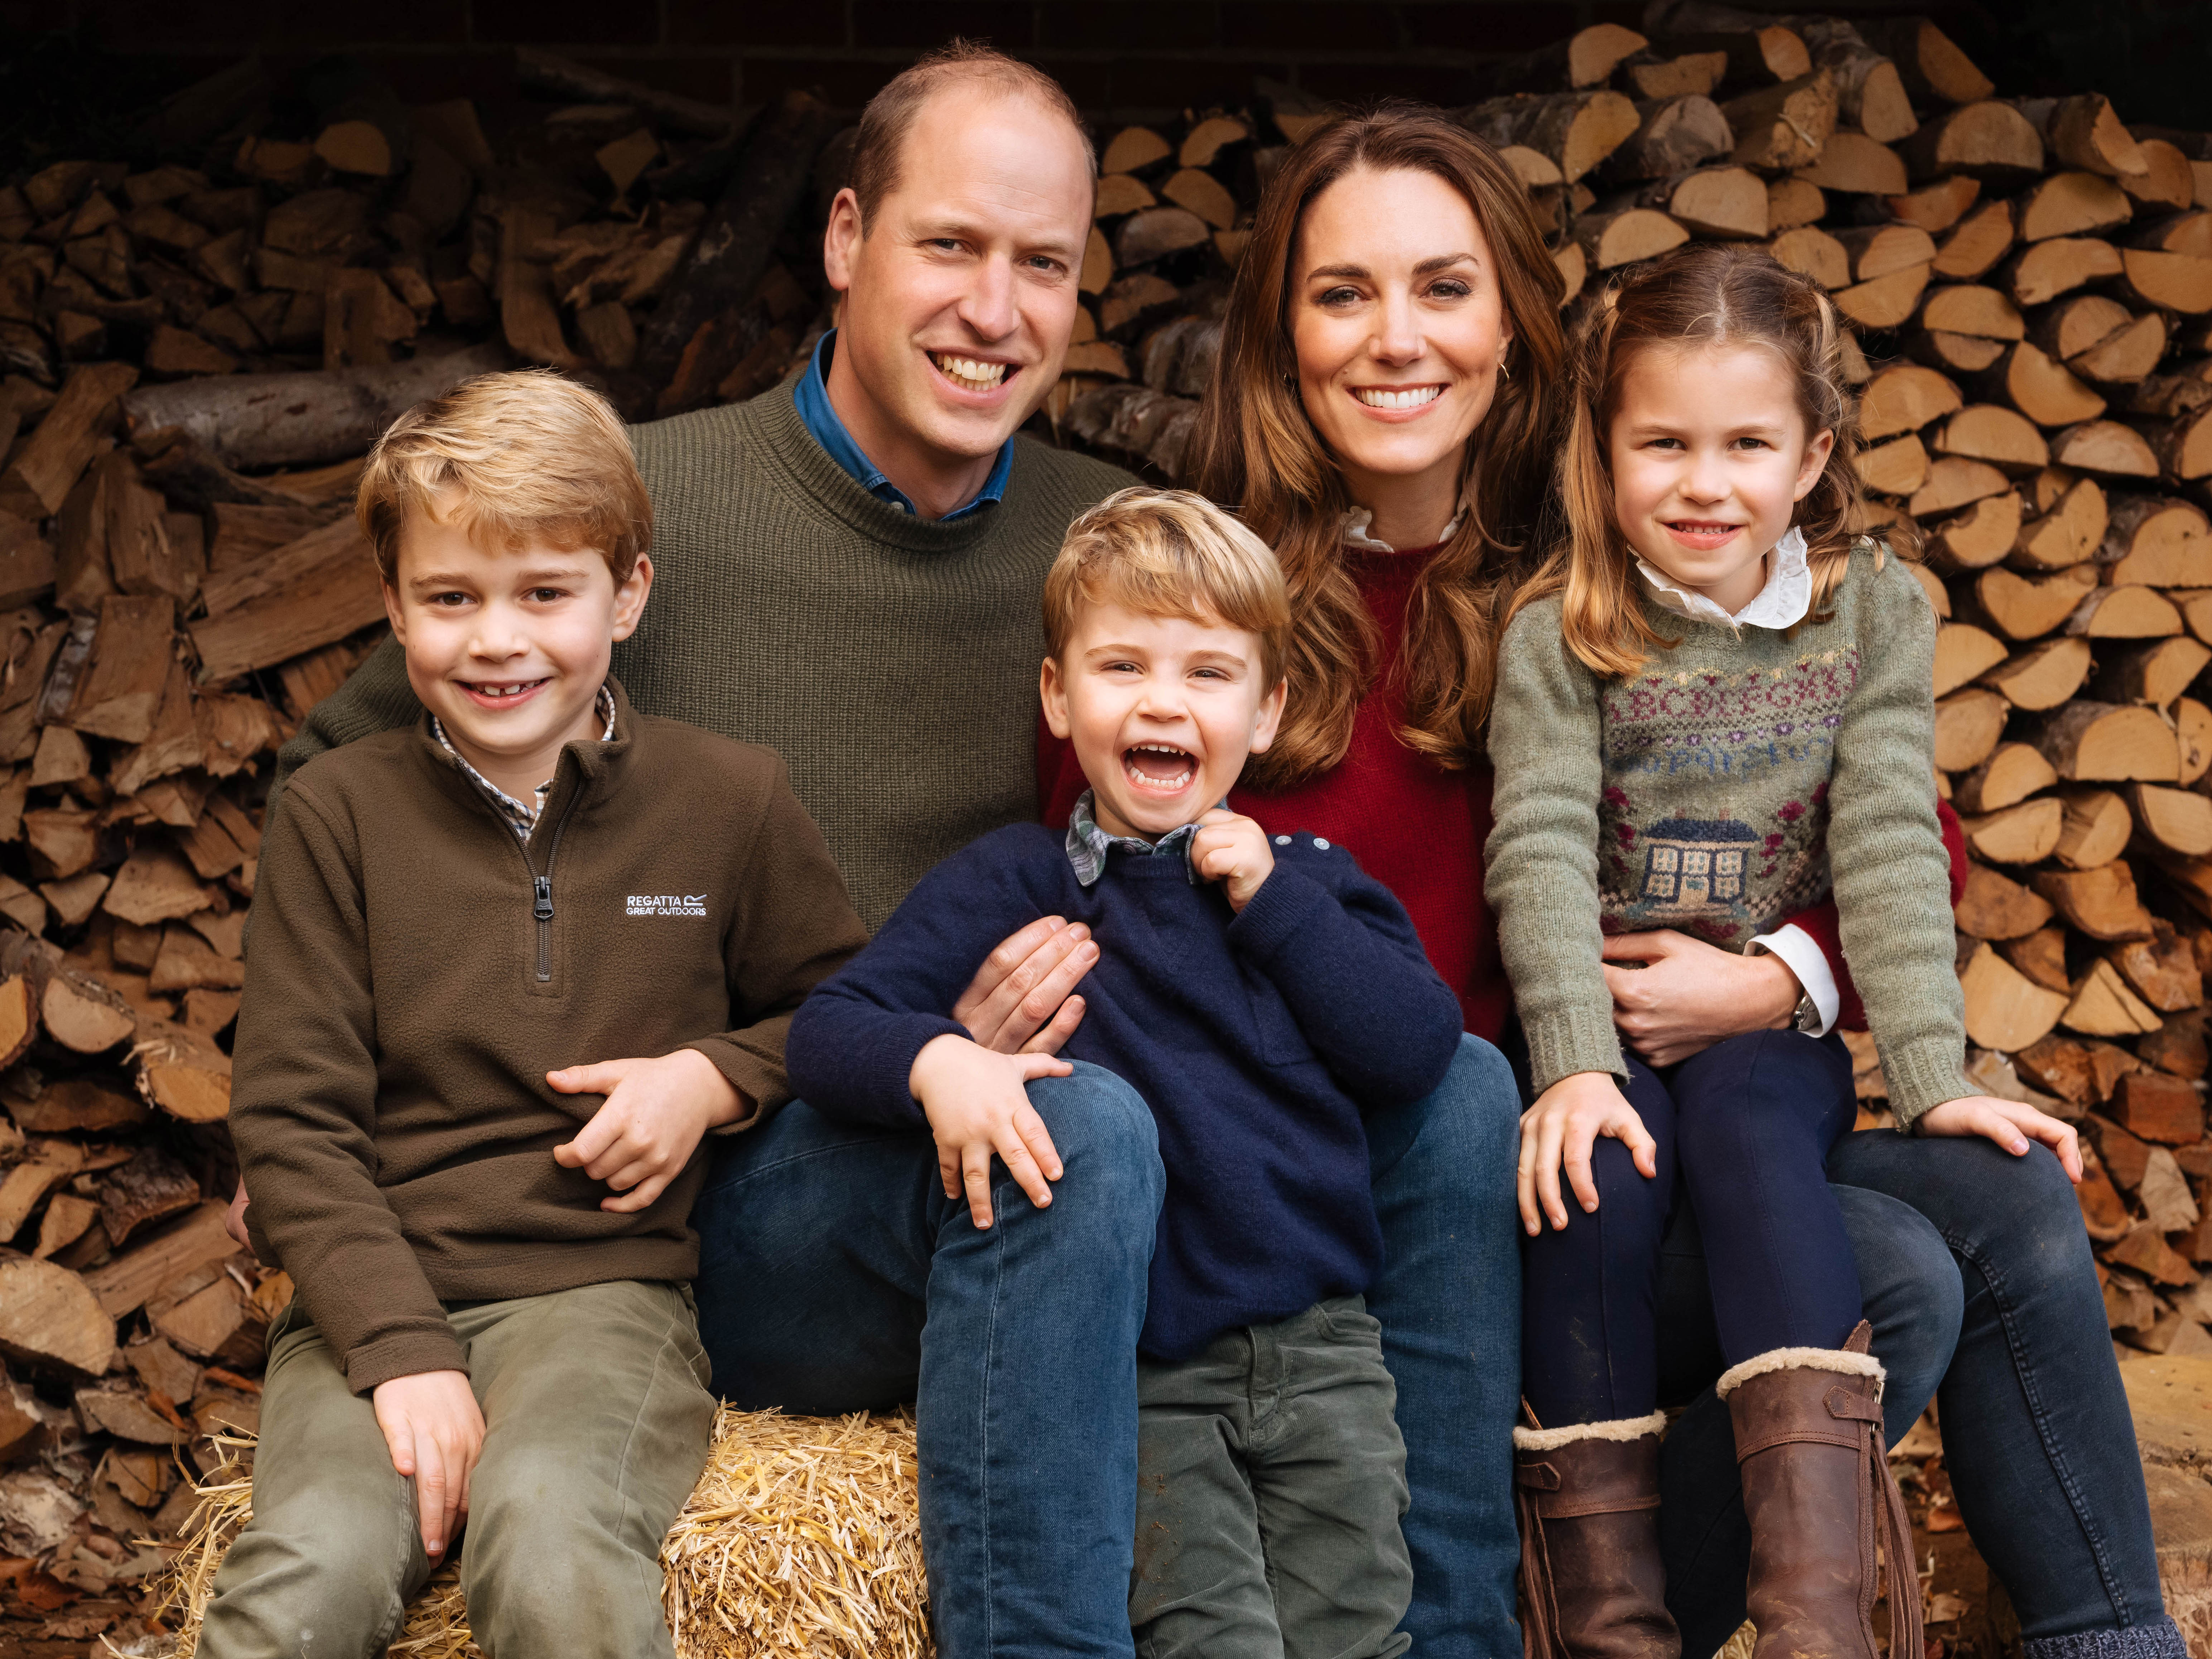 Prince William, the Duke of Cambridge, and Catherine, the Duchess of Cambridge, with their three children Prince George (left), Princess Charlotte (right) and Prince Louis at Anmer Hall in Norfolk. | Source: Getty Images